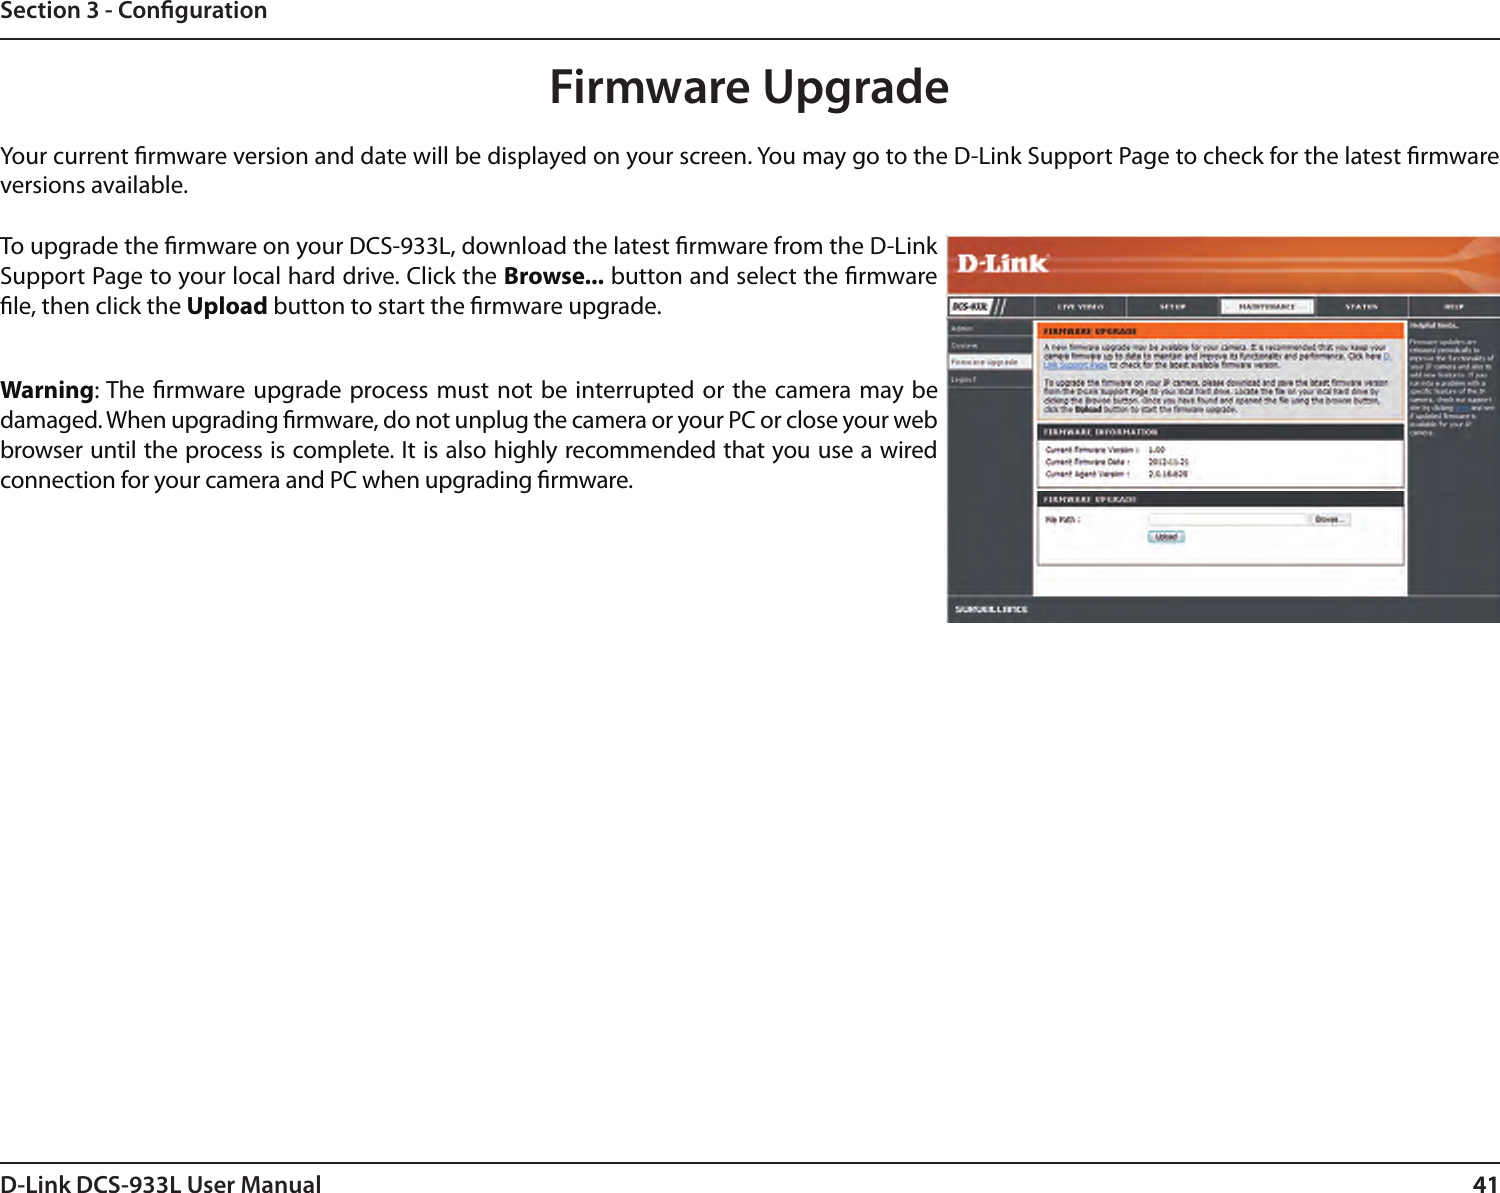 41D-Link DCS-933L User Manual 41Section 3 - CongurationFirmware UpgradeYour current rmware version and date will be displayed on your screen. You may go to the D-Link Support Page to check for the latest rmware versions available. To upgrade the rmware on your DCS-933L, download the latest rmware from the D-Link Support Page to your local hard drive. Click the Browse... button and select the rmware le, then click the Upload button to start the rmware upgrade.Warning: The rmware upgrade process must not be  interrupted or the camera may be damaged. When upgrading rmware, do not unplug the camera or your PC or close your web browser until the process is complete. It is also highly recommended that you use a wired connection for your camera and PC when upgrading rmware.